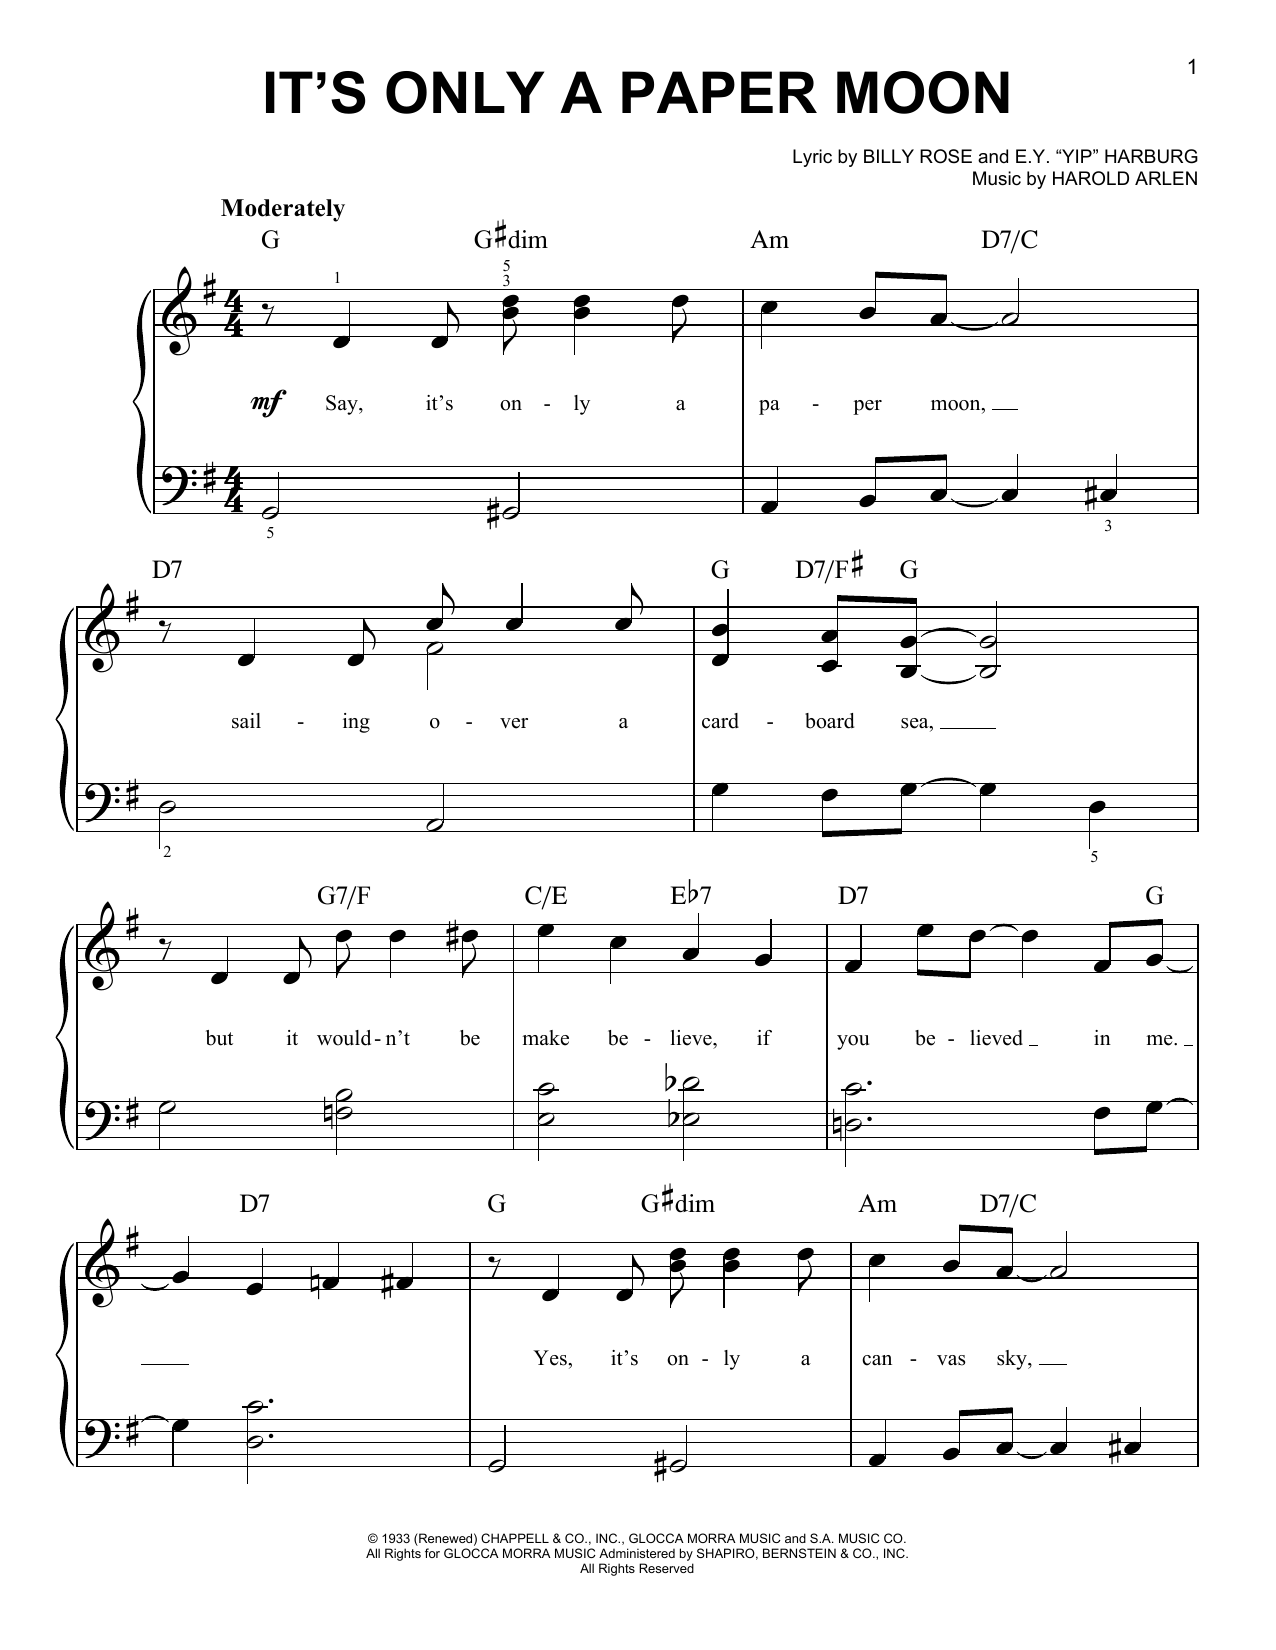 E.Y. Harburg It's Only A Paper Moon sheet music notes and chords. Download Printable PDF.